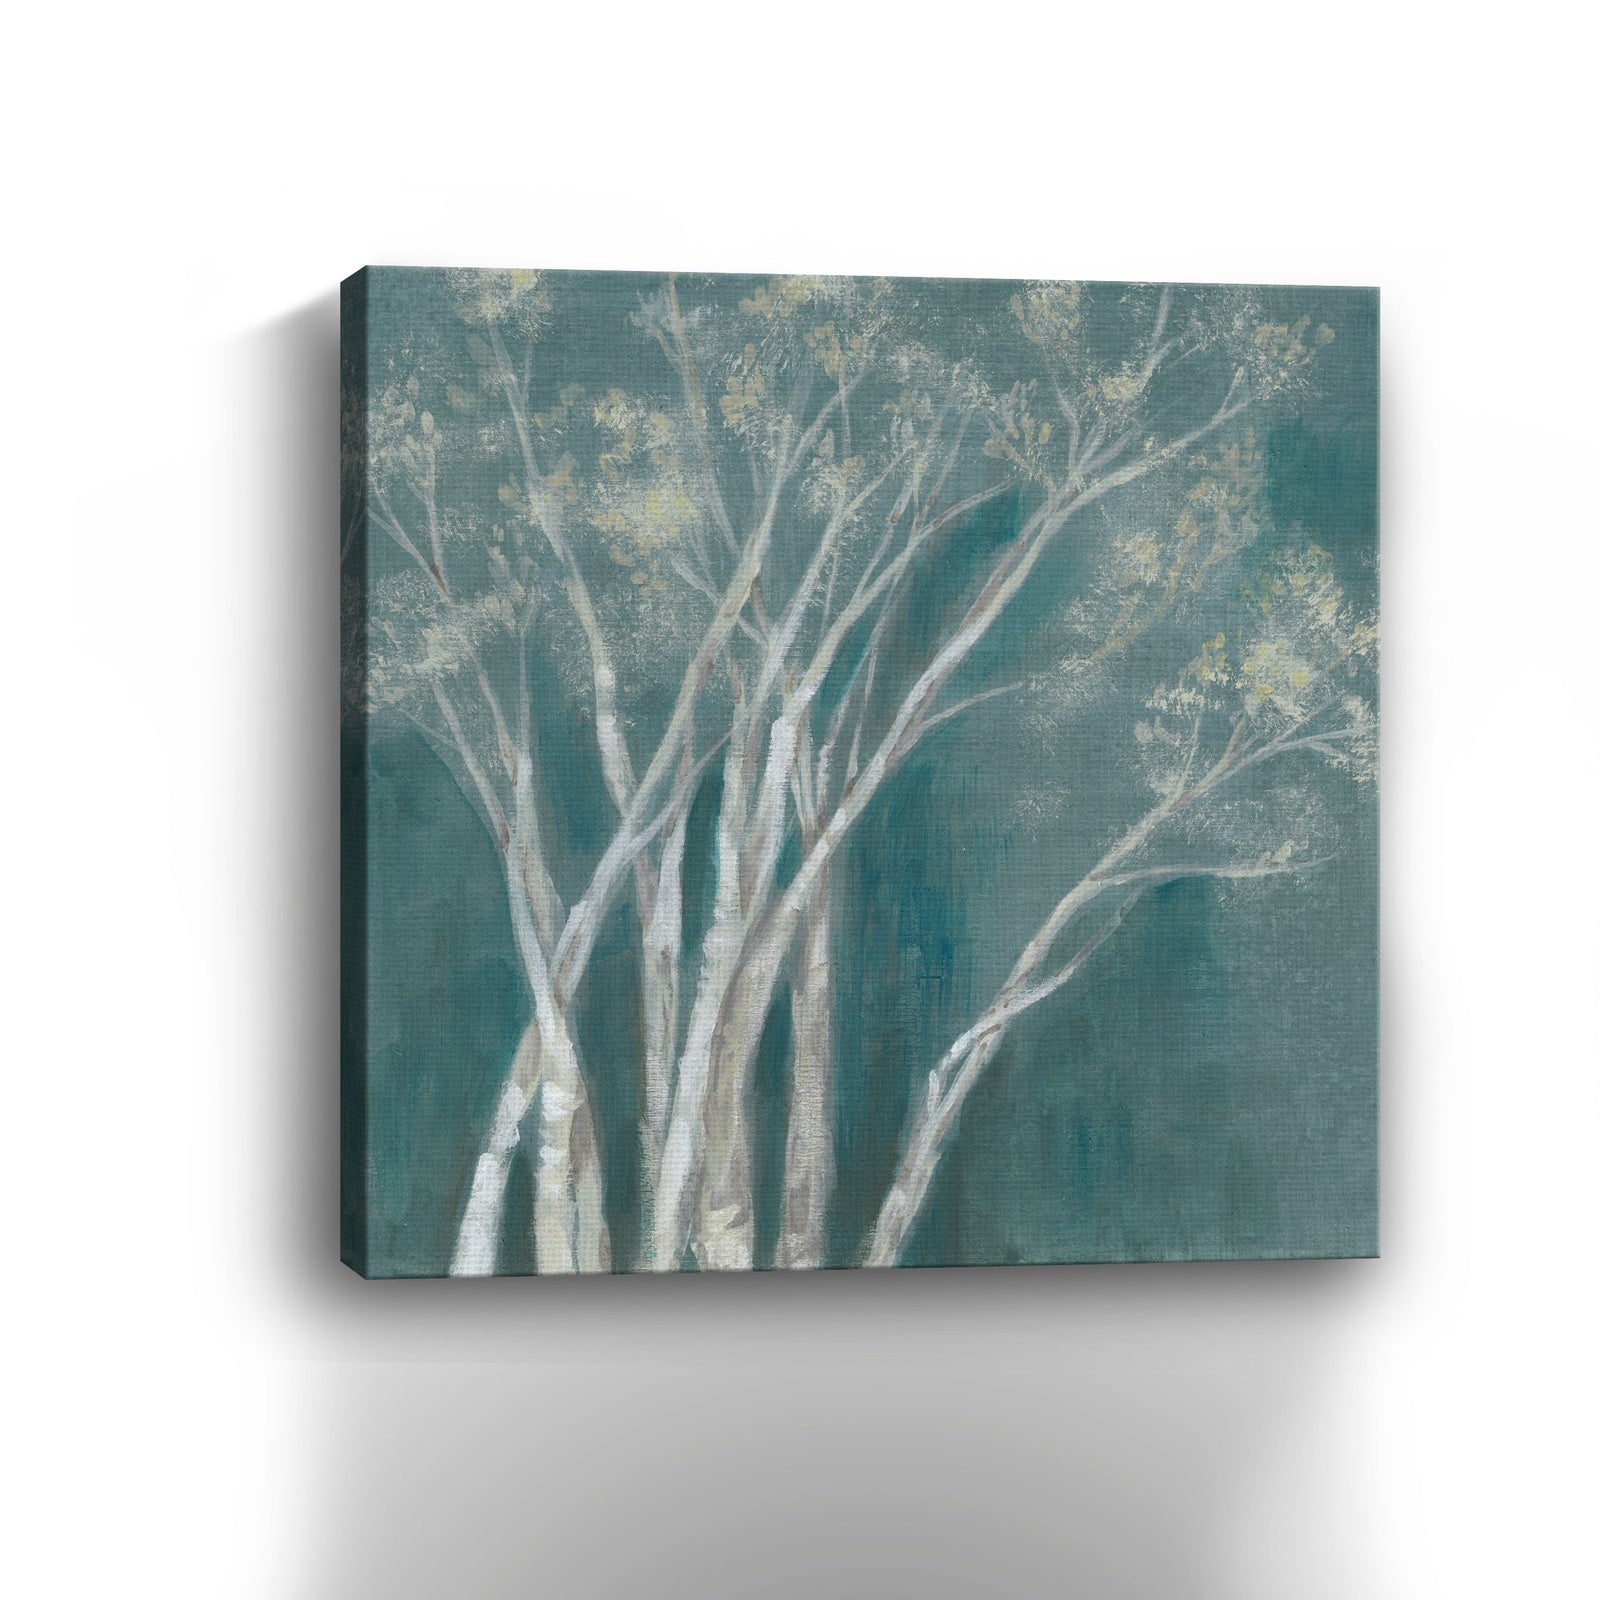 Ethereal Birches II Canvas Giclee - Pier 1